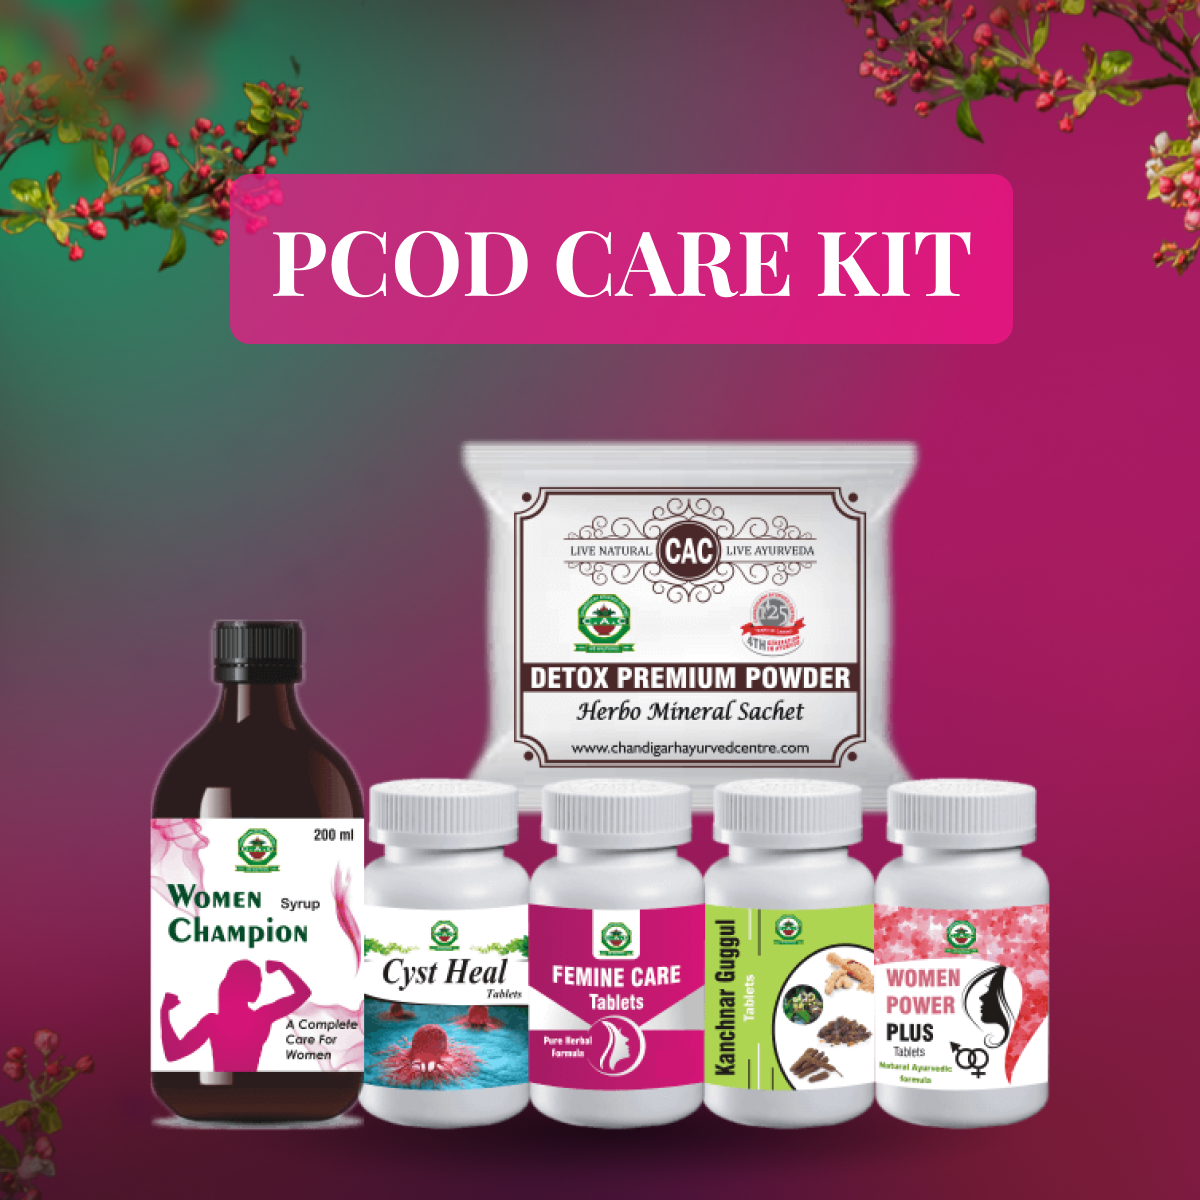 PCOD Care Kit